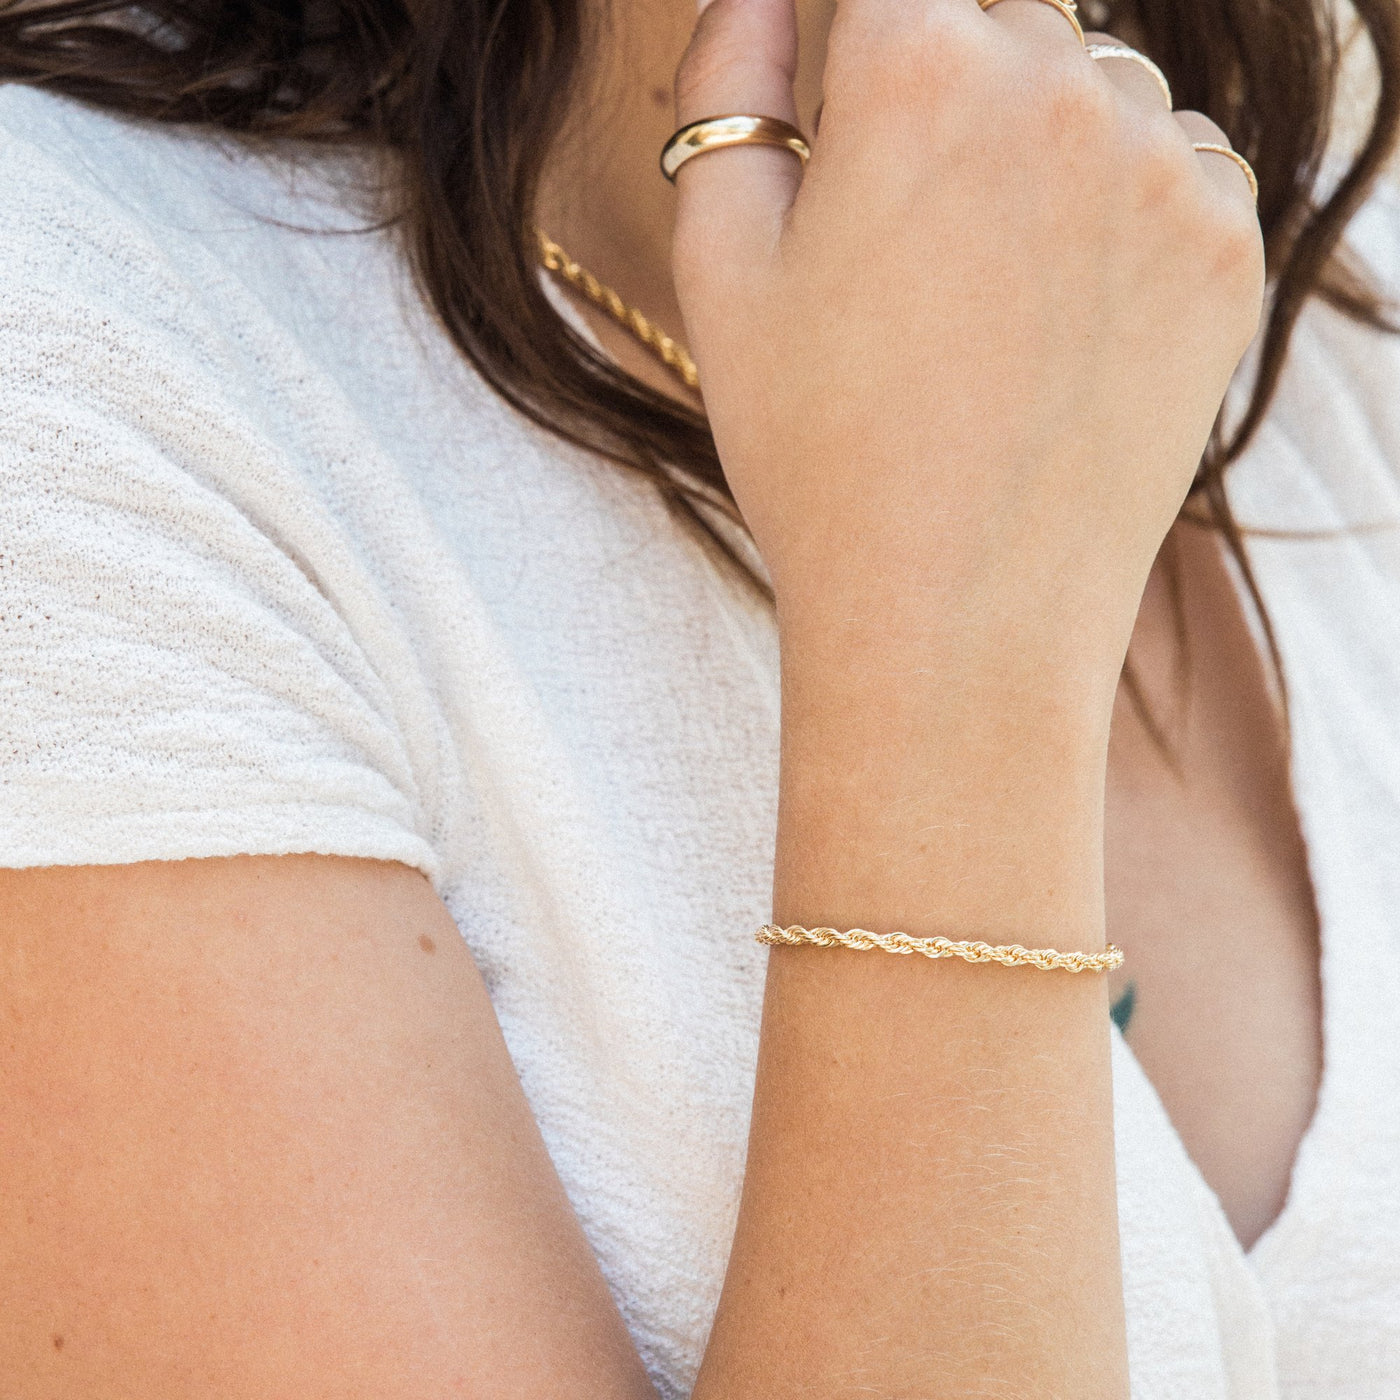 Chunky Rope Chain Bracelet by Simple & Dainty Jewelry